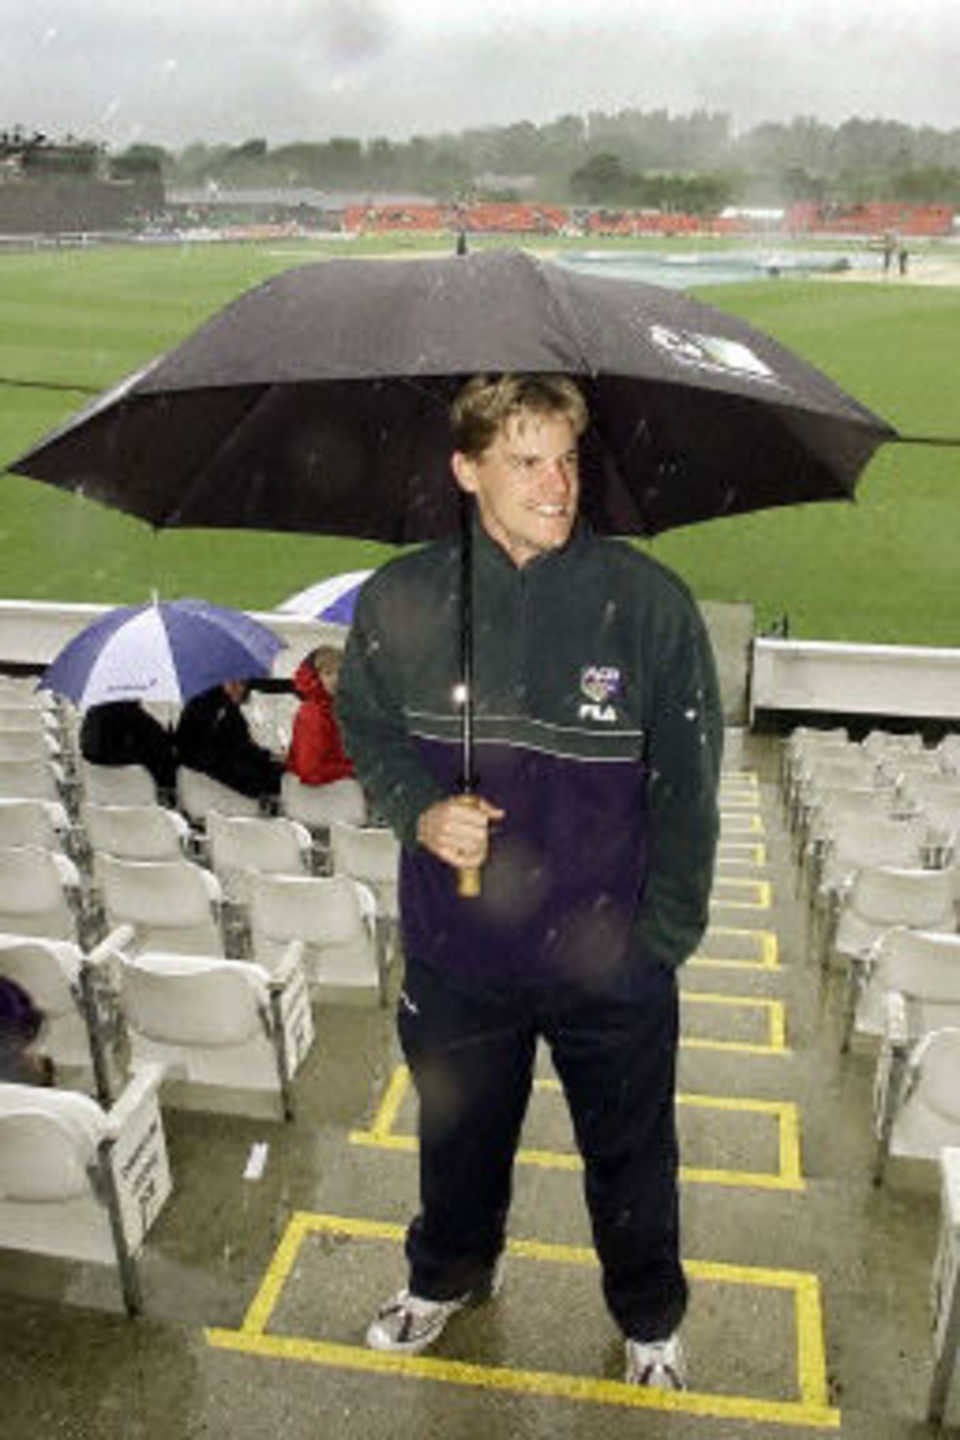 Nathan Bracken surveys the English summer conditions, 6th ODI at Chester-le-Street, 16 June 2001.